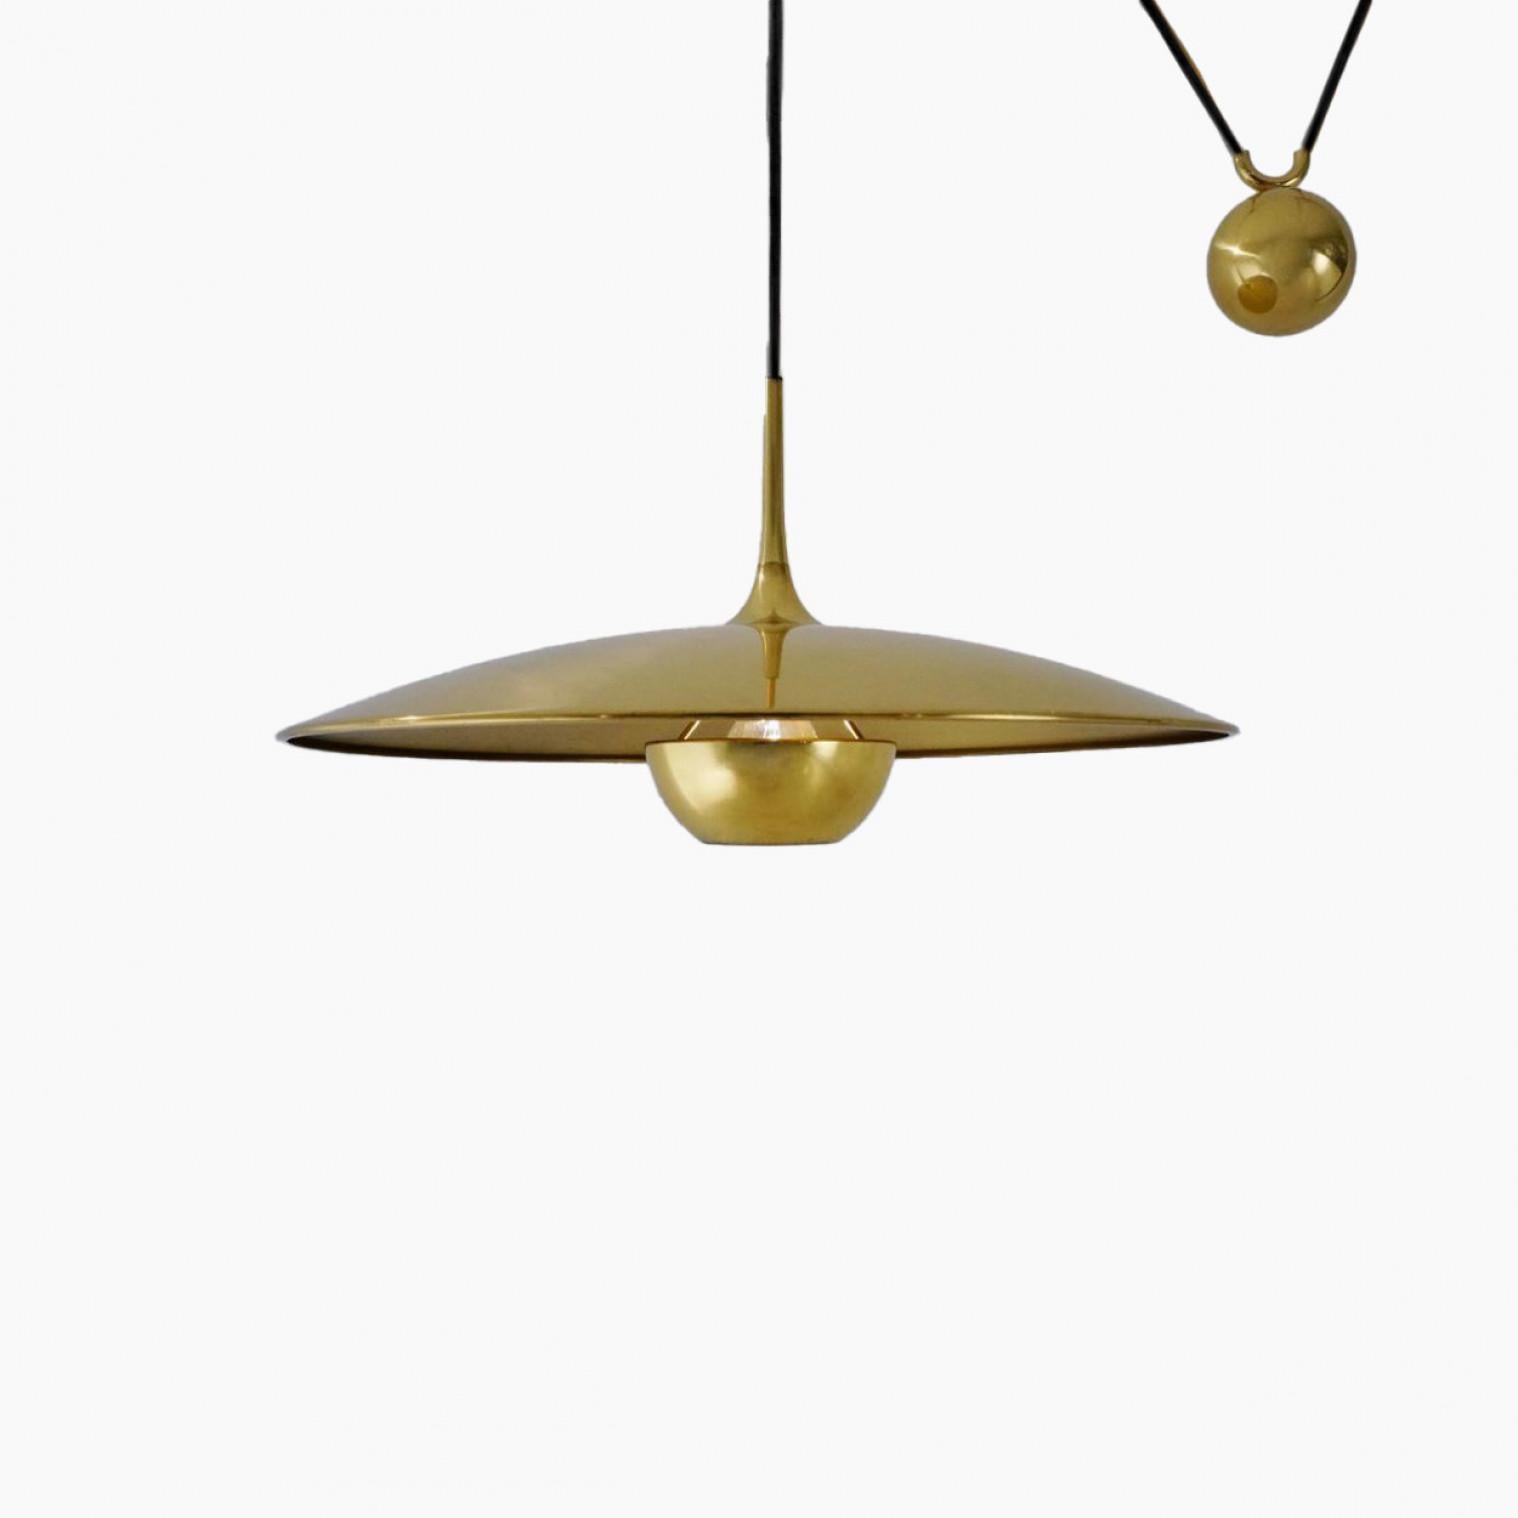 Brass Onos Fixture With Side Counter Weights by Florian Schulz For Sale